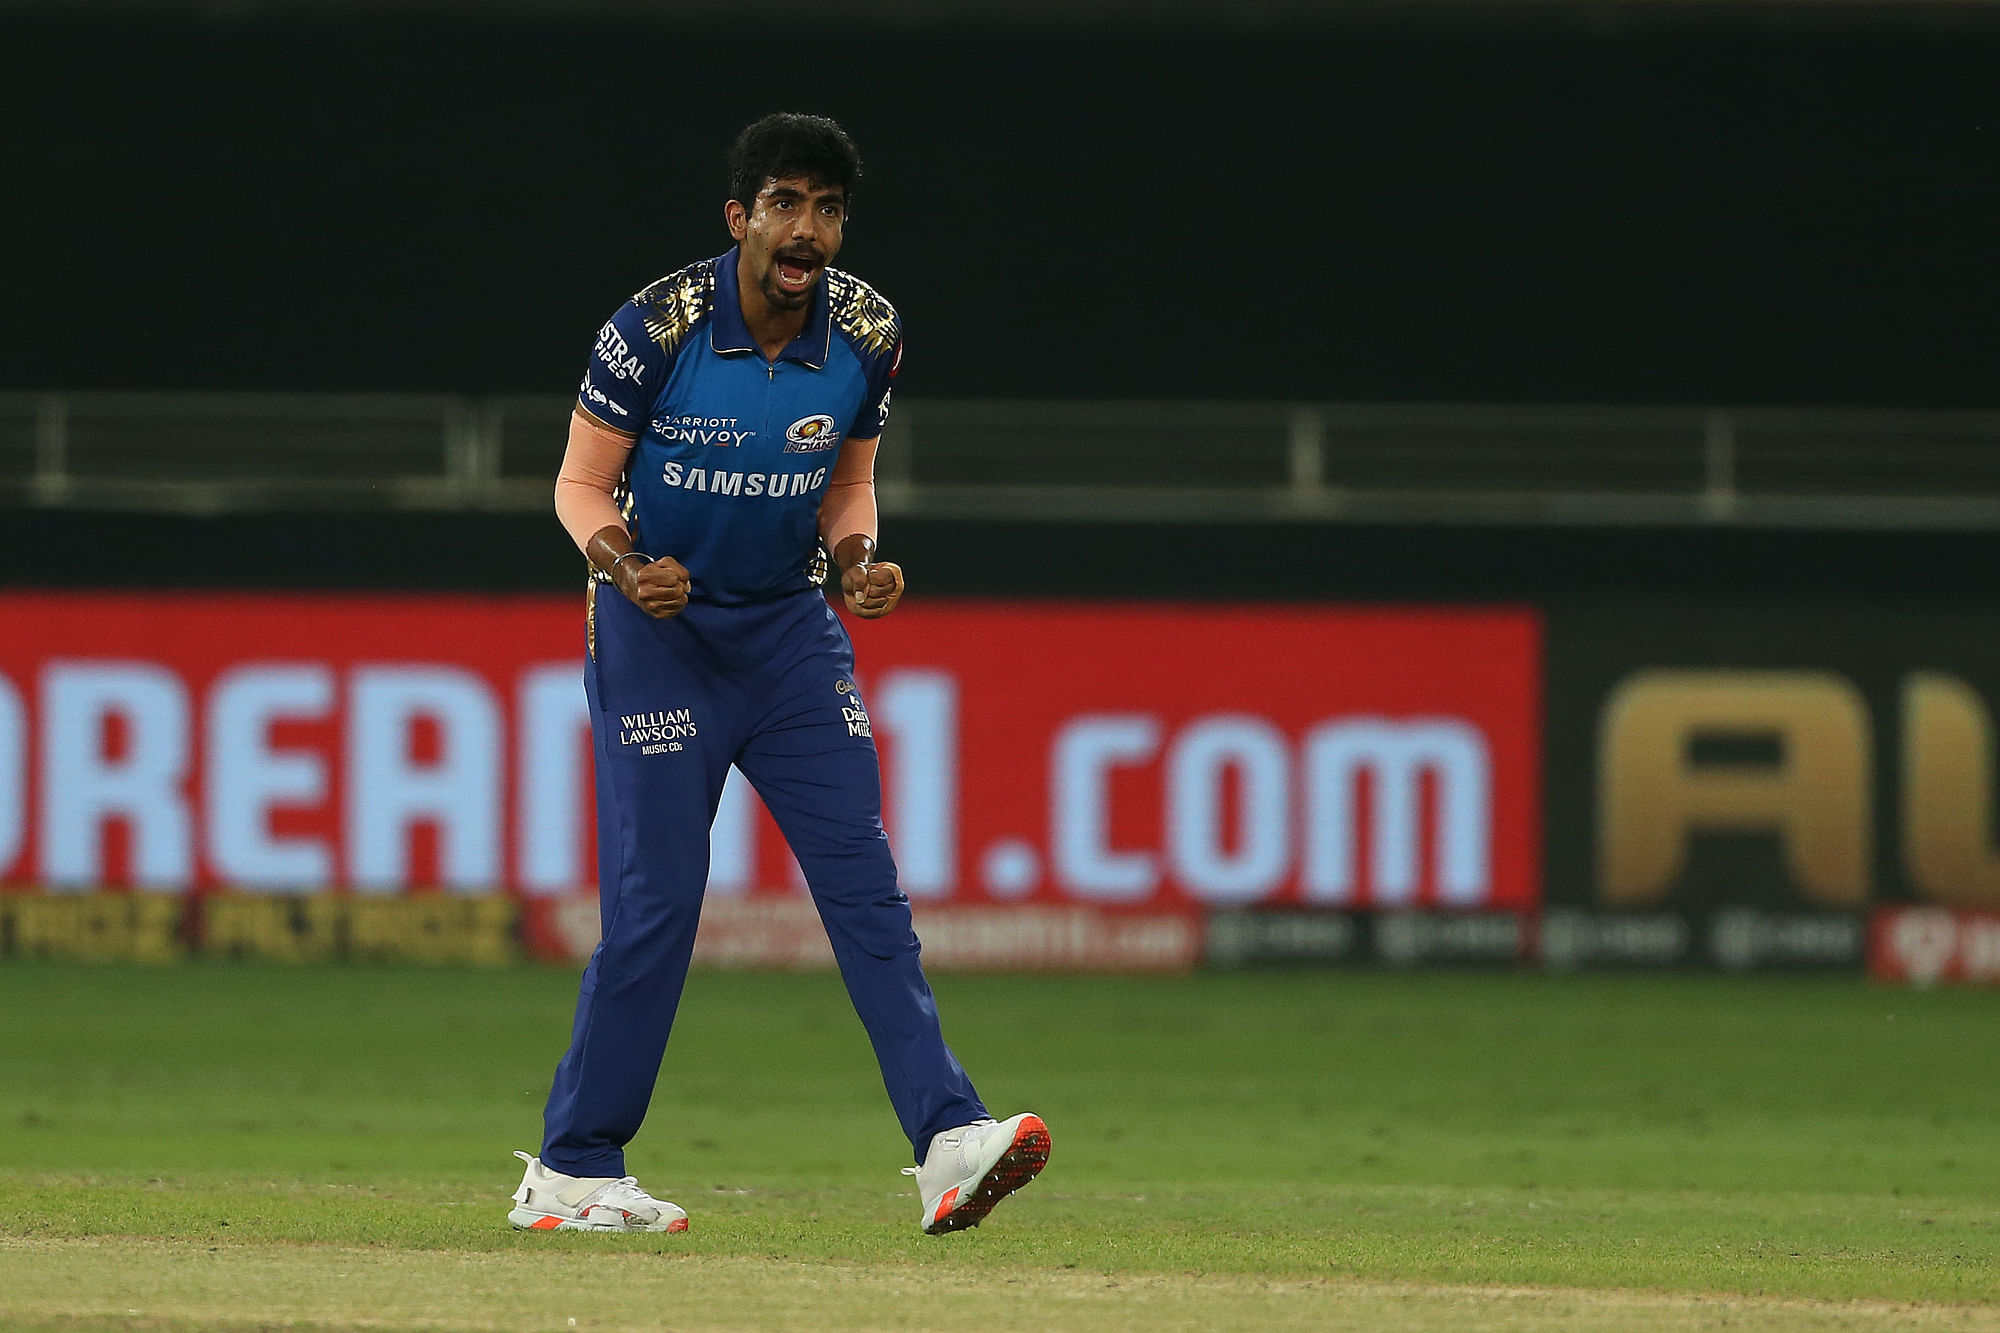 Jasprit Bumrah bowled a brilliant spell including a double wicket maiden to take MI through to yet another final.&nbsp;